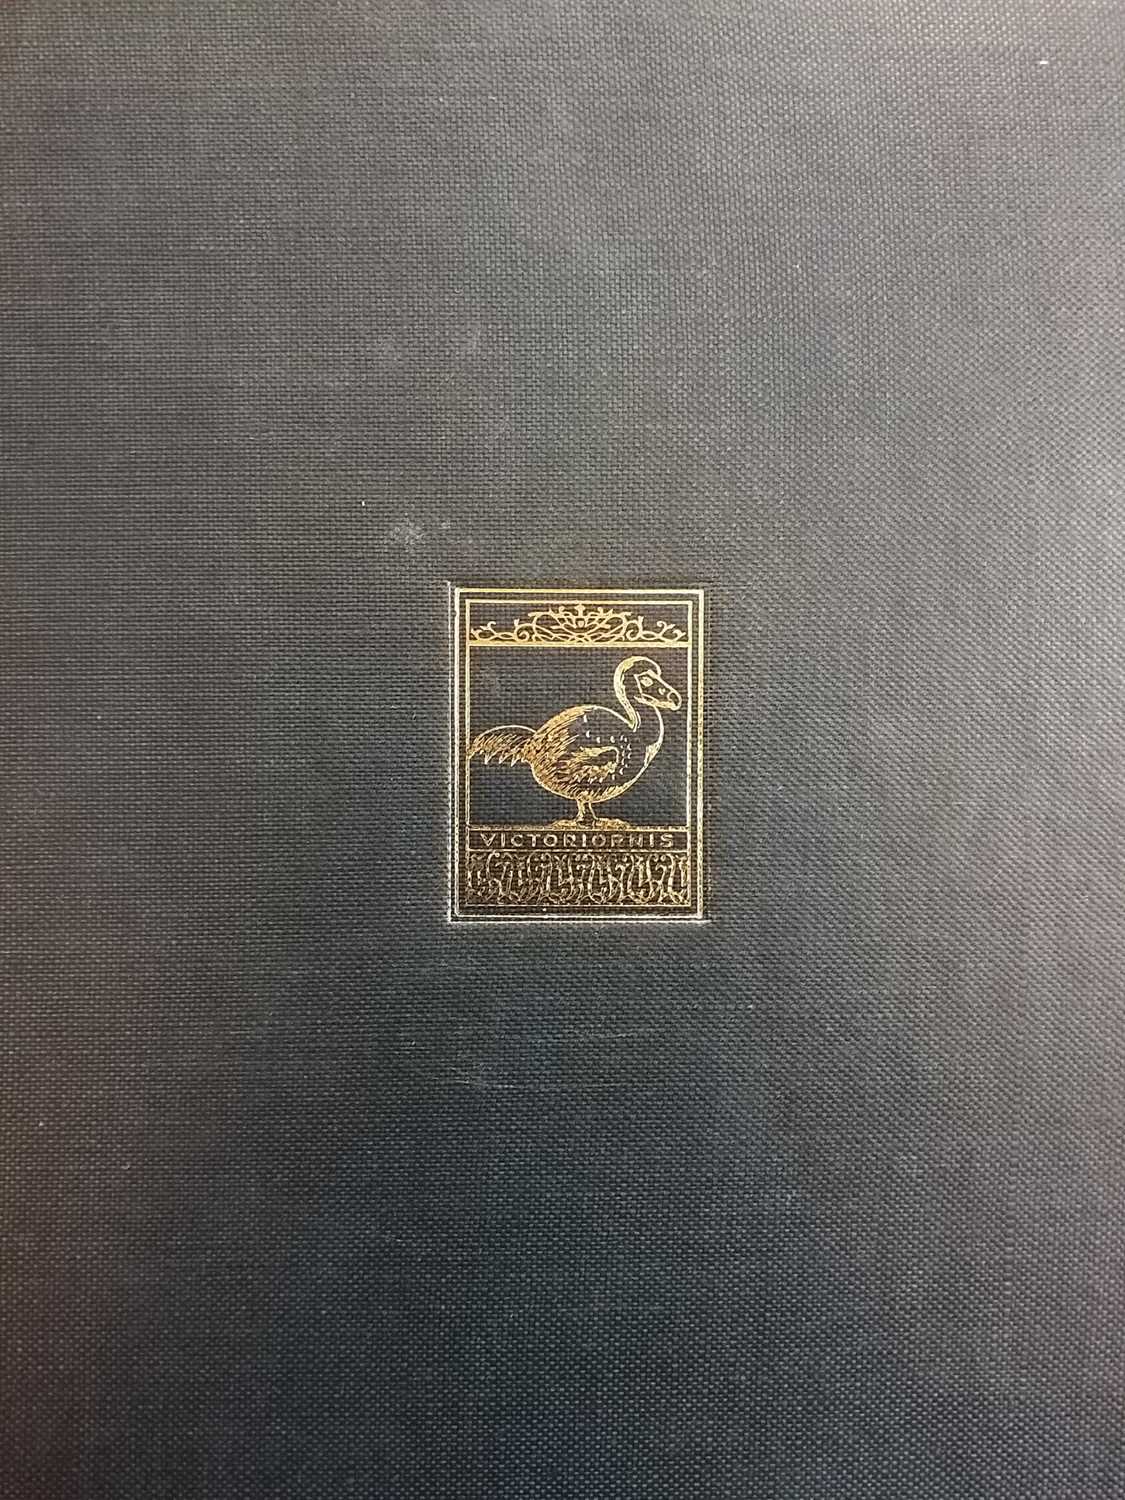 Lot 95 - Hachisuka (Masauji). The Dodo and Kindred Birds..., 1st edition. London: H. F. & G. Witherby, 1953